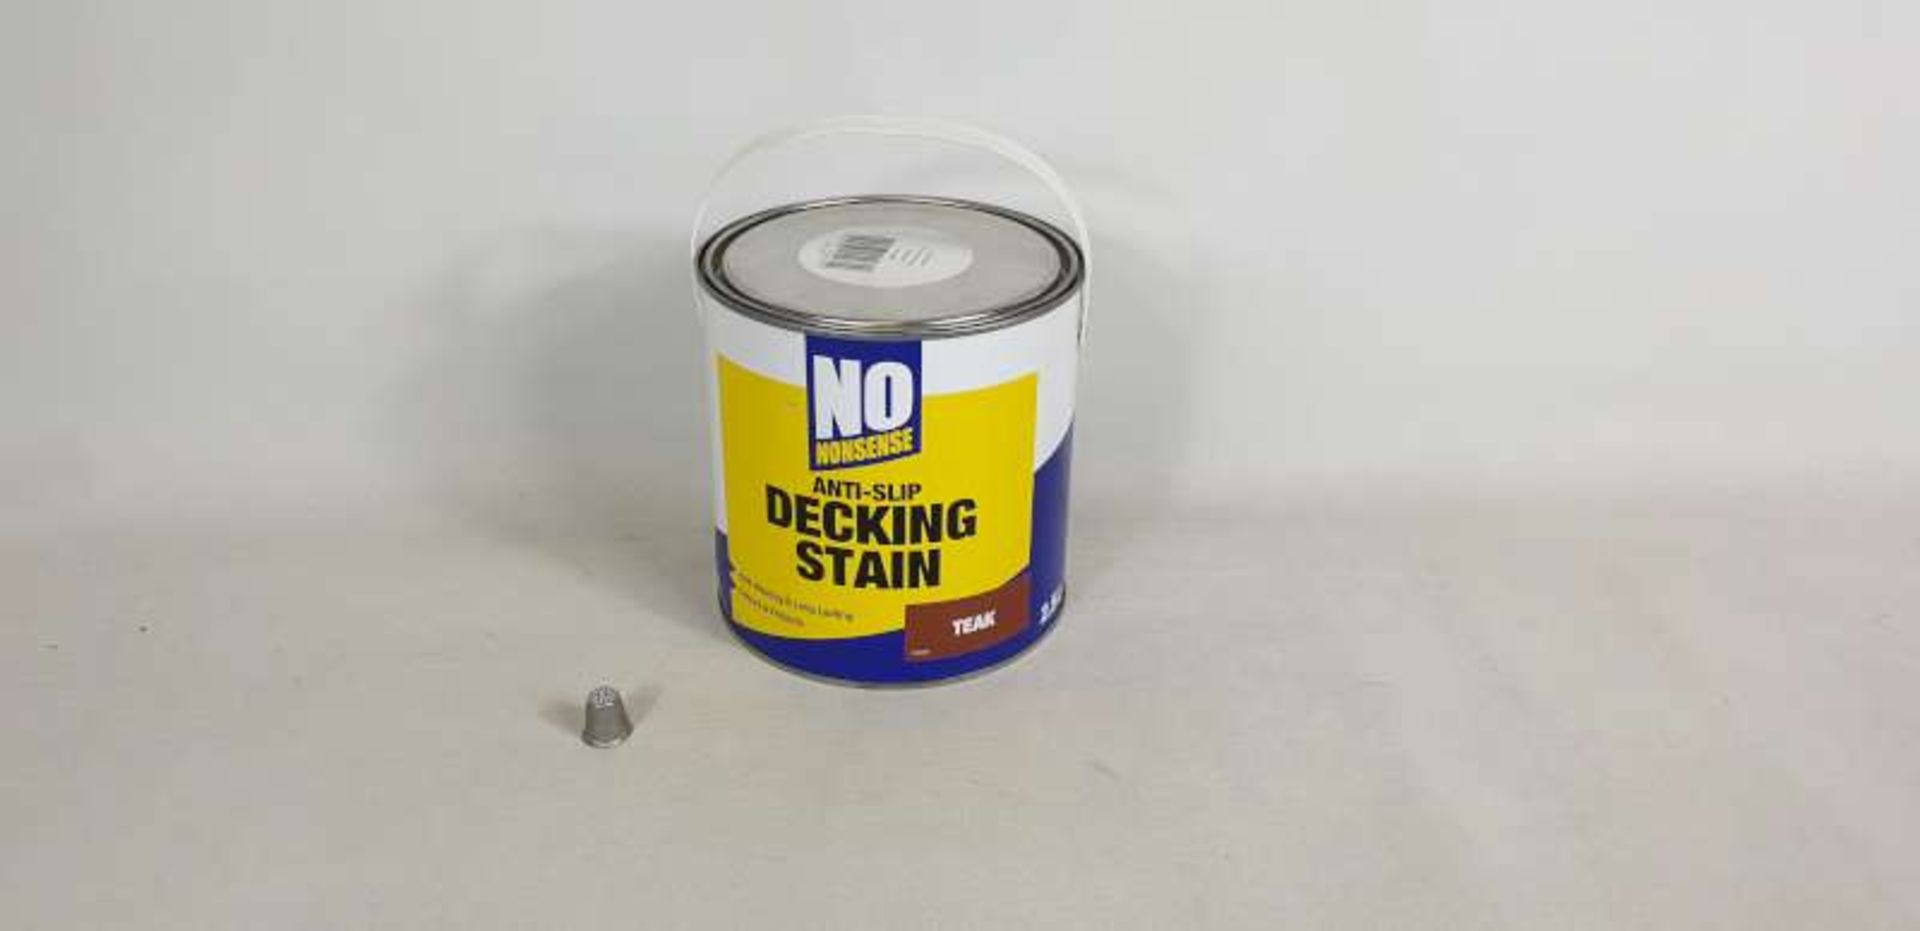 25 X 2.5 LITRE TINS OF NO NONSENCE ANTI SLIP DECKING STAIN